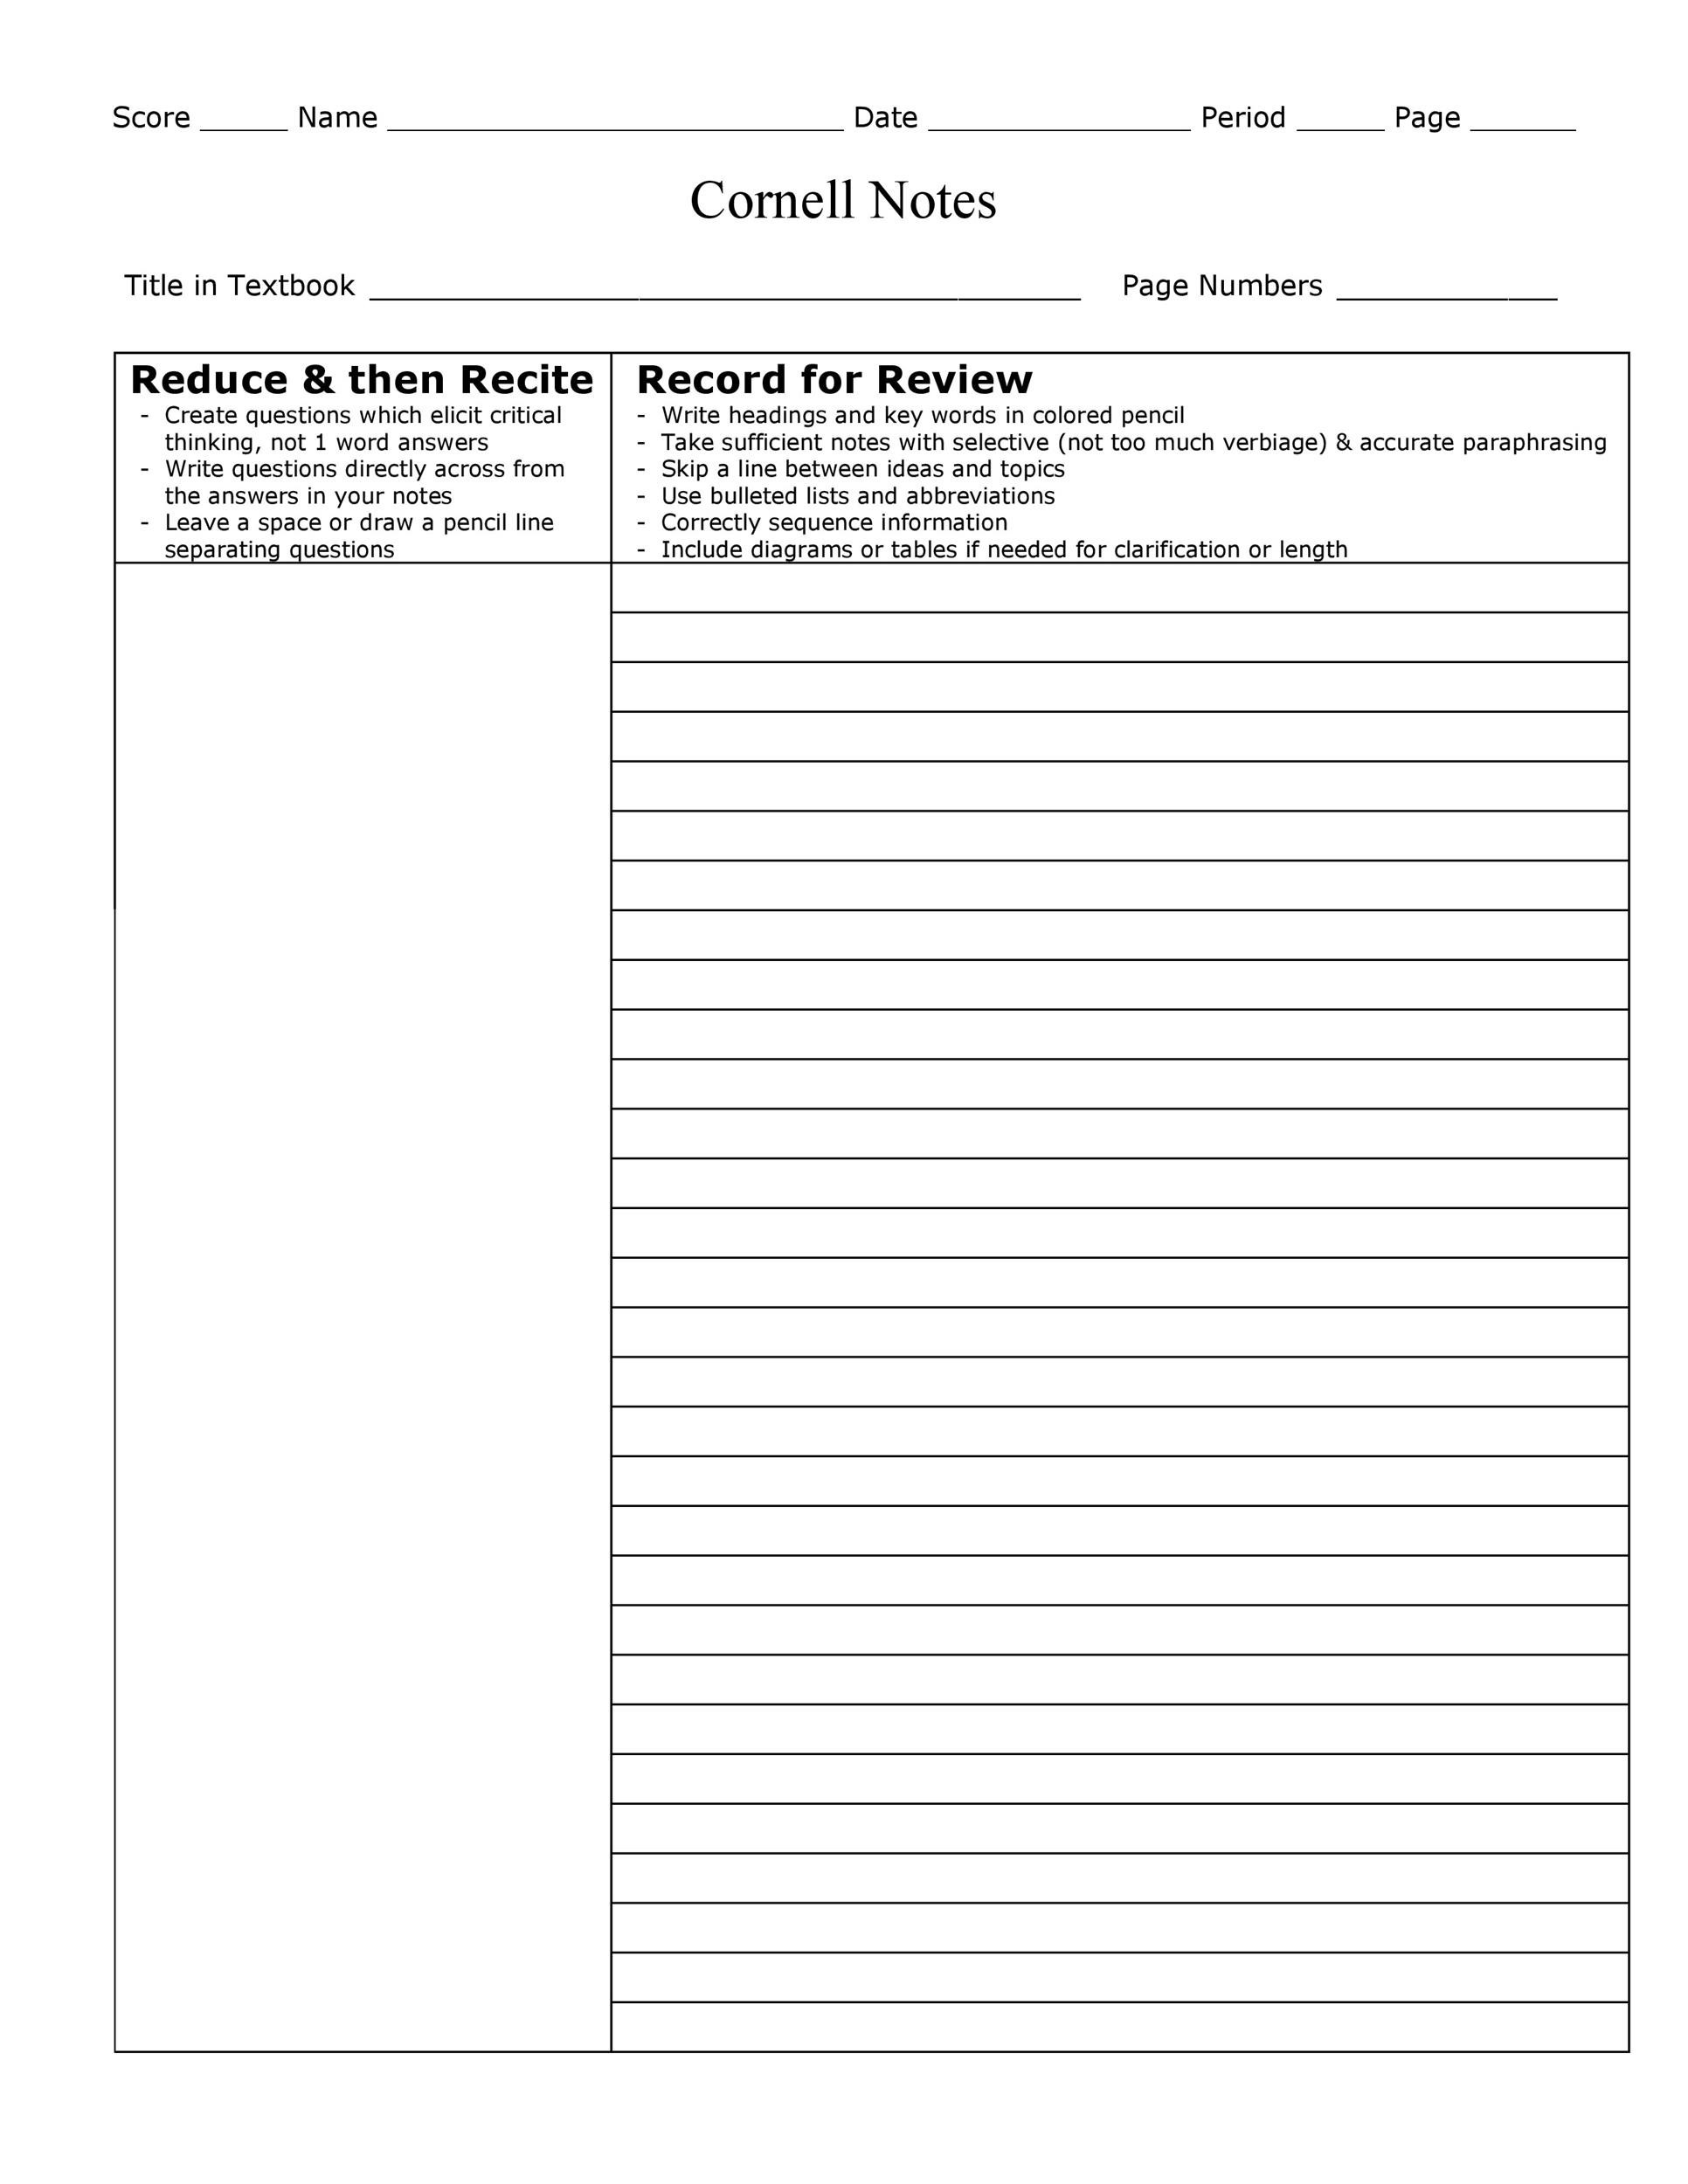 Cornell Note Template Printable from templatelab.com